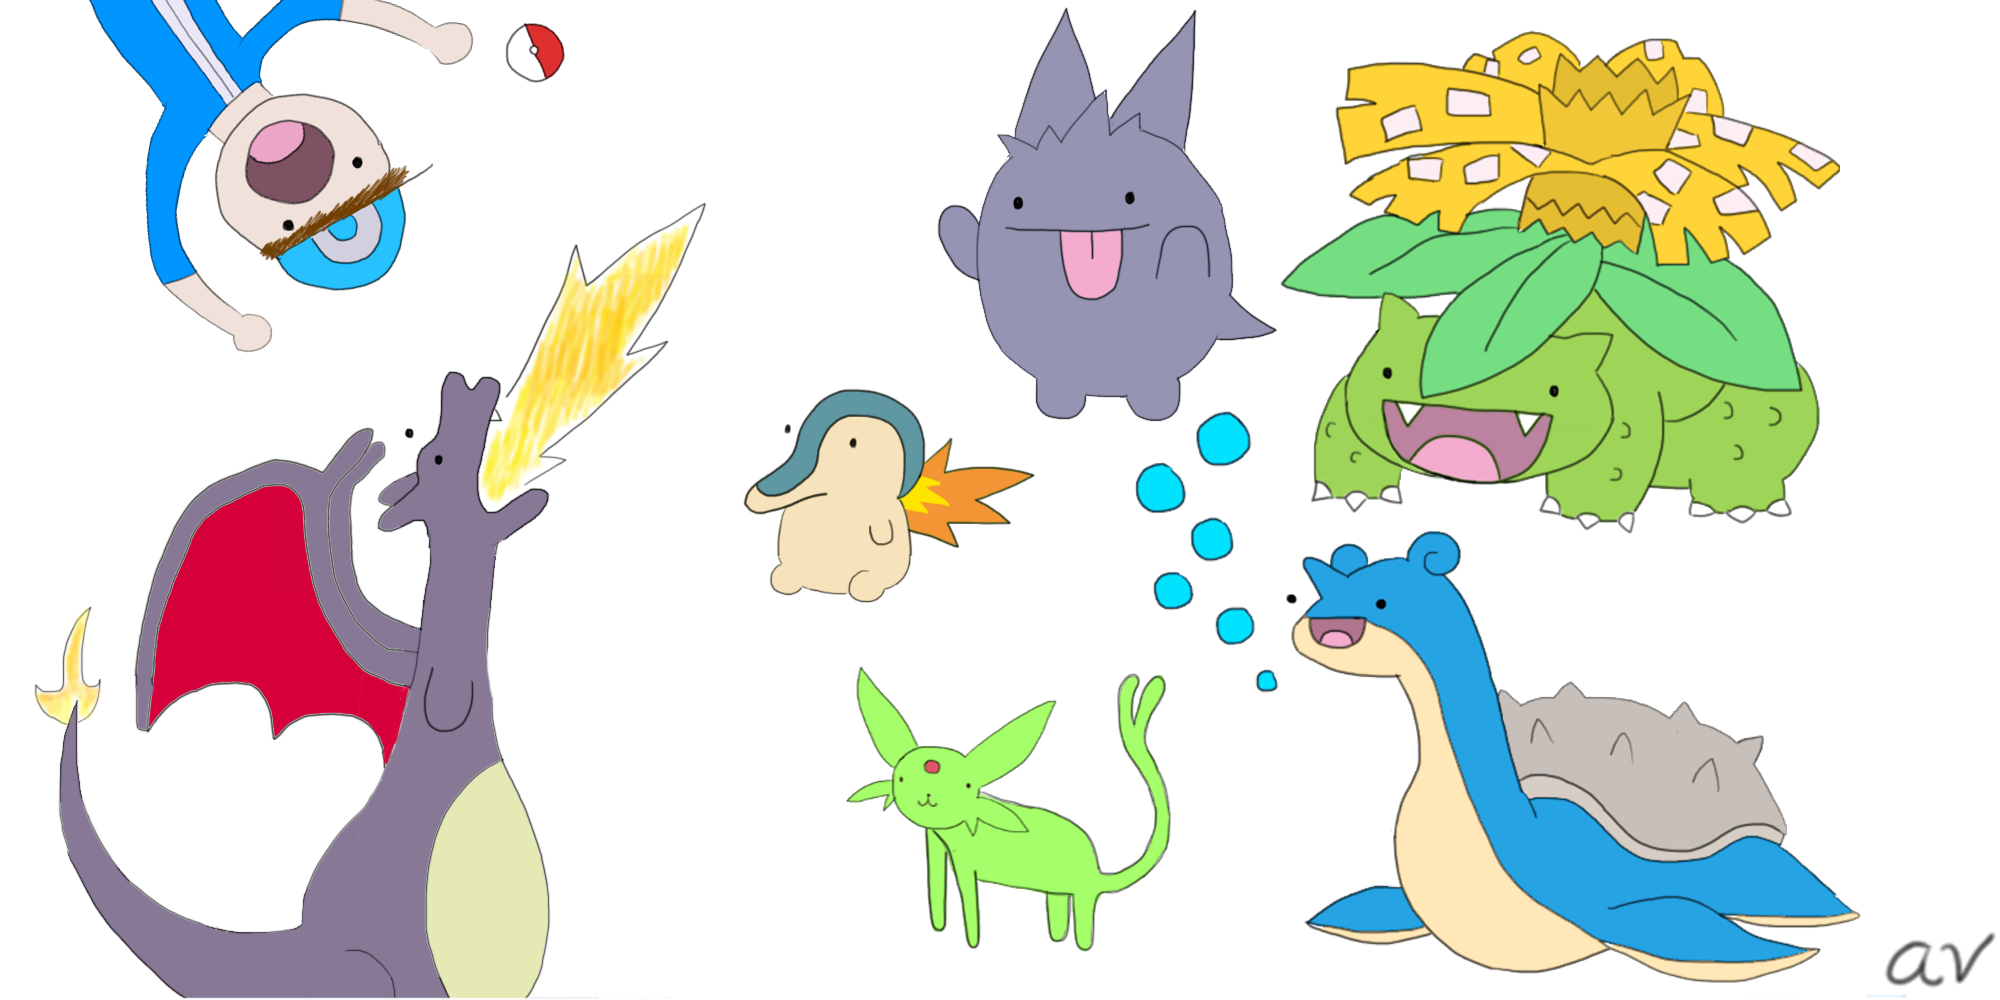 Art] [OC] Everybody seemed to like the derpy Pokemon I posted a few days ago, so I decided to draw some more! Here's my team!